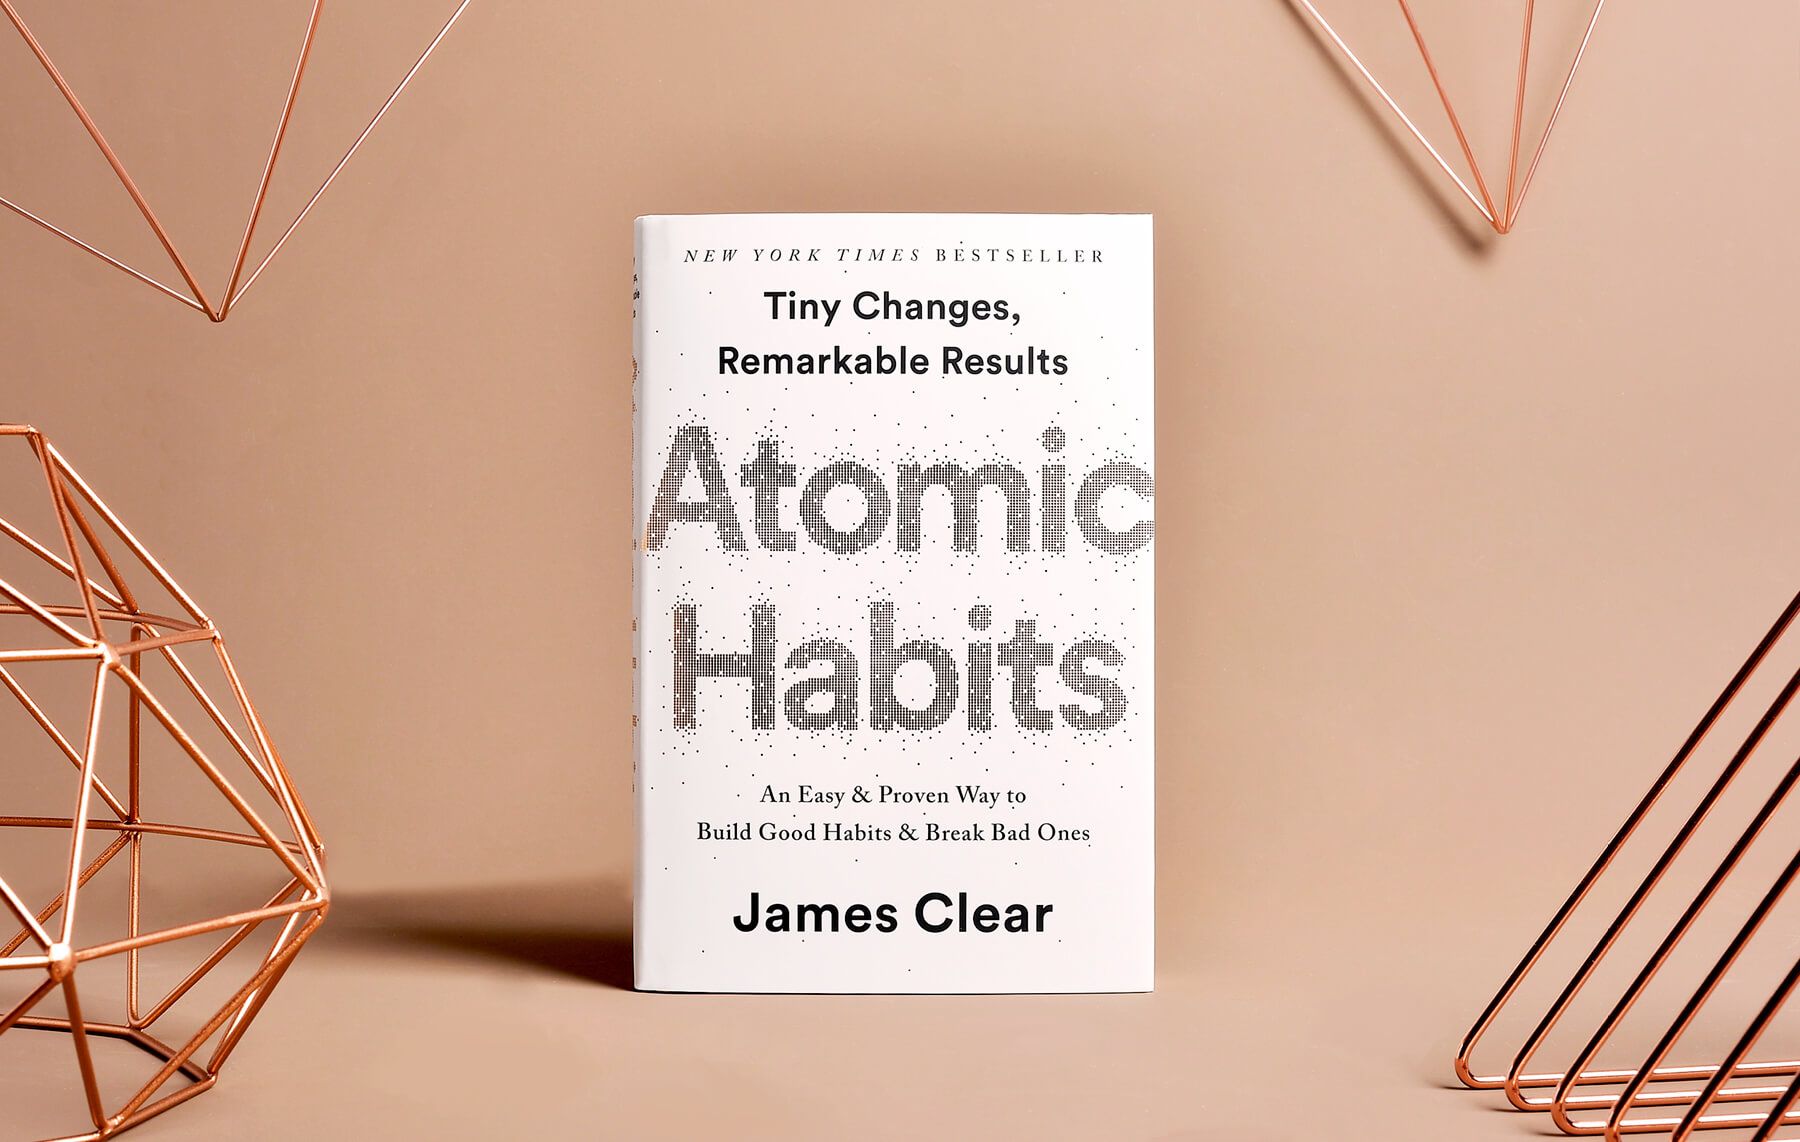 Atomic Habits: a personal summary